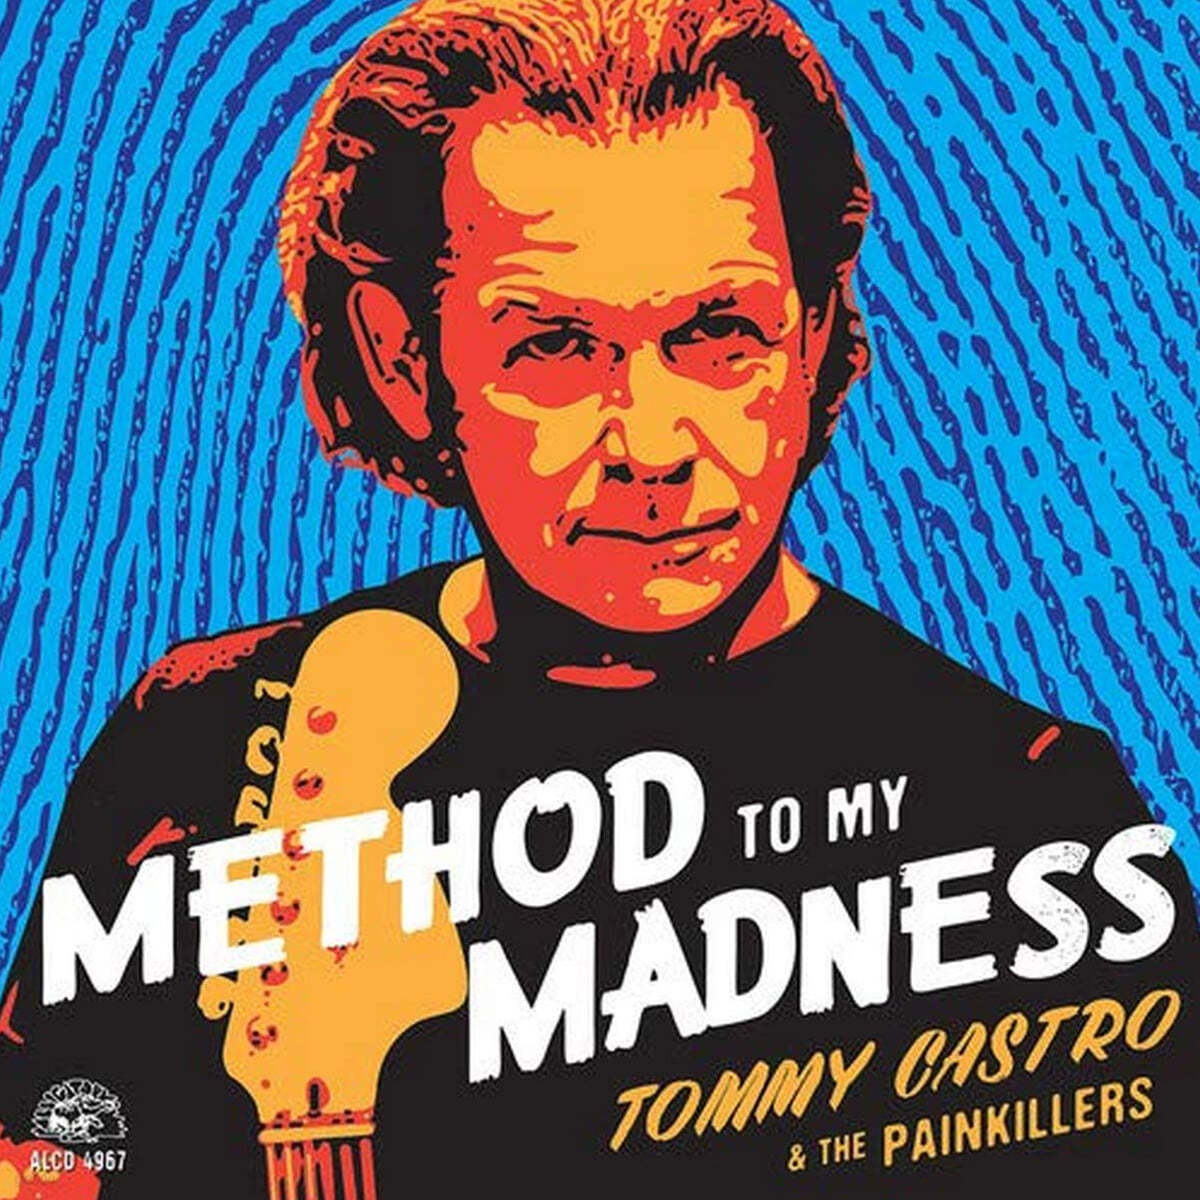 Tommy Castro & The Painkillers (토미 카스트로 앤 더 페인킬러스) - Method To My Madness [LP] 